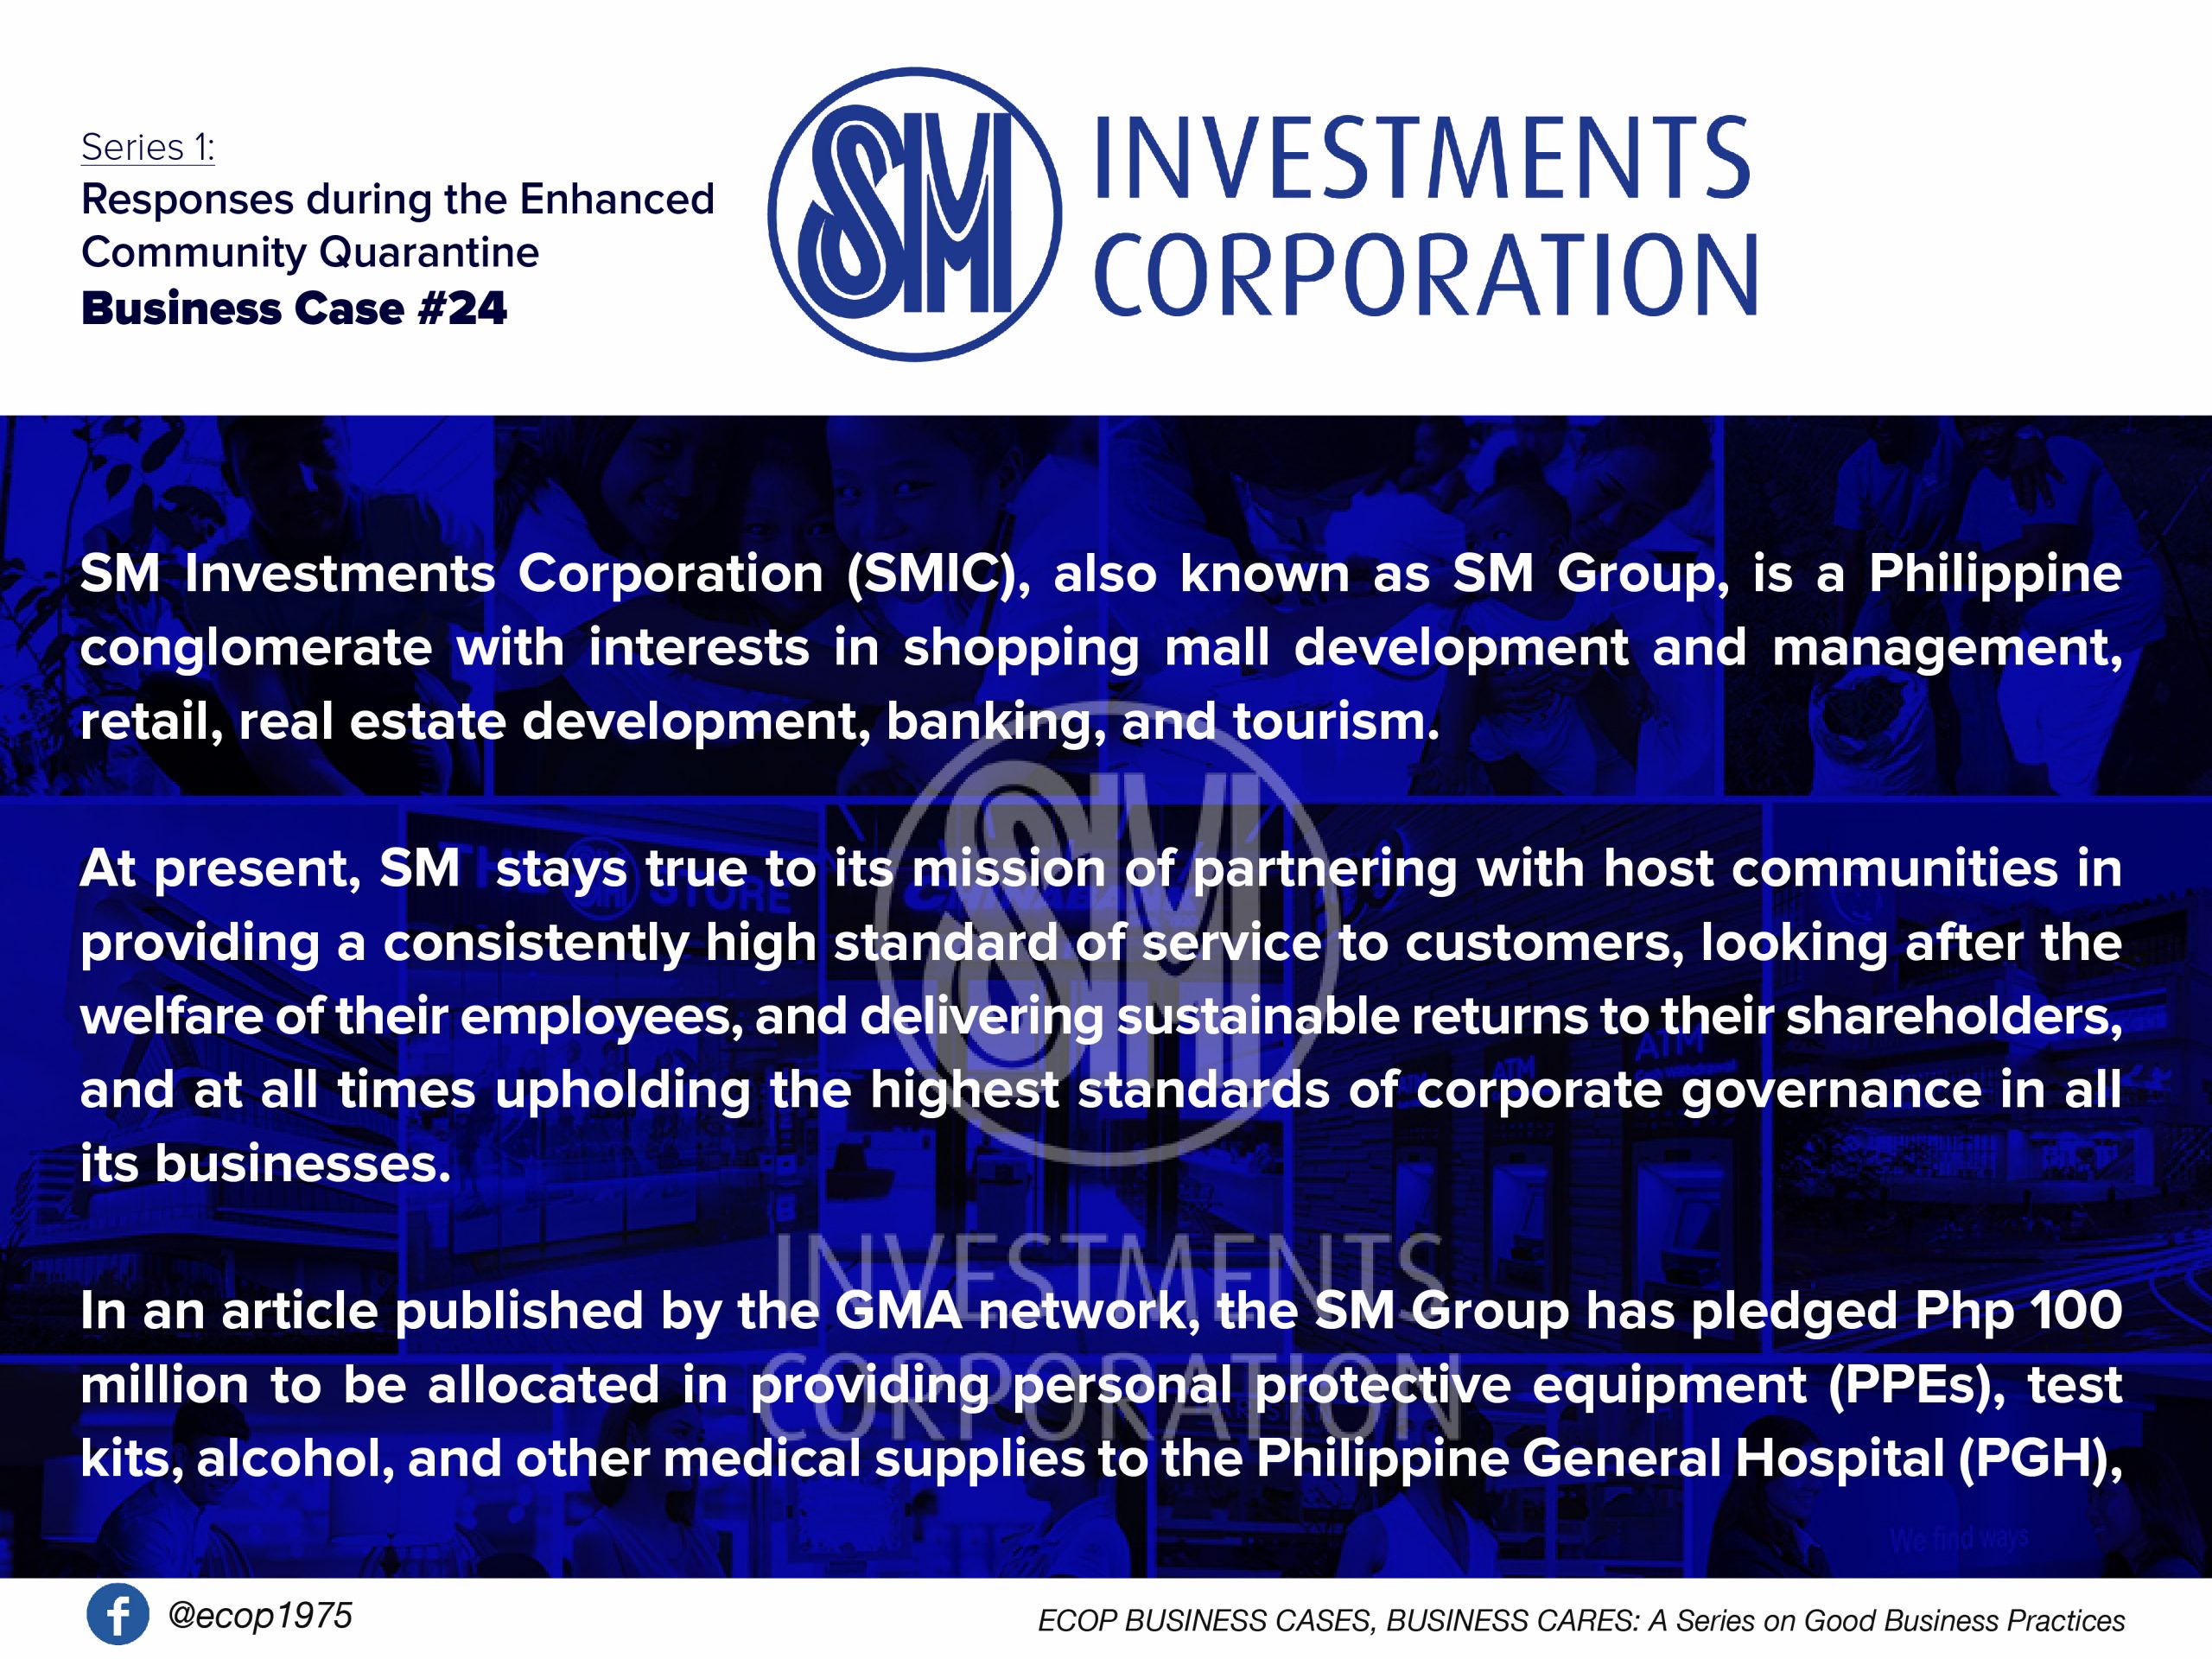 01-Best practices of SM Investments Corporation amid the COVID-19 crisis